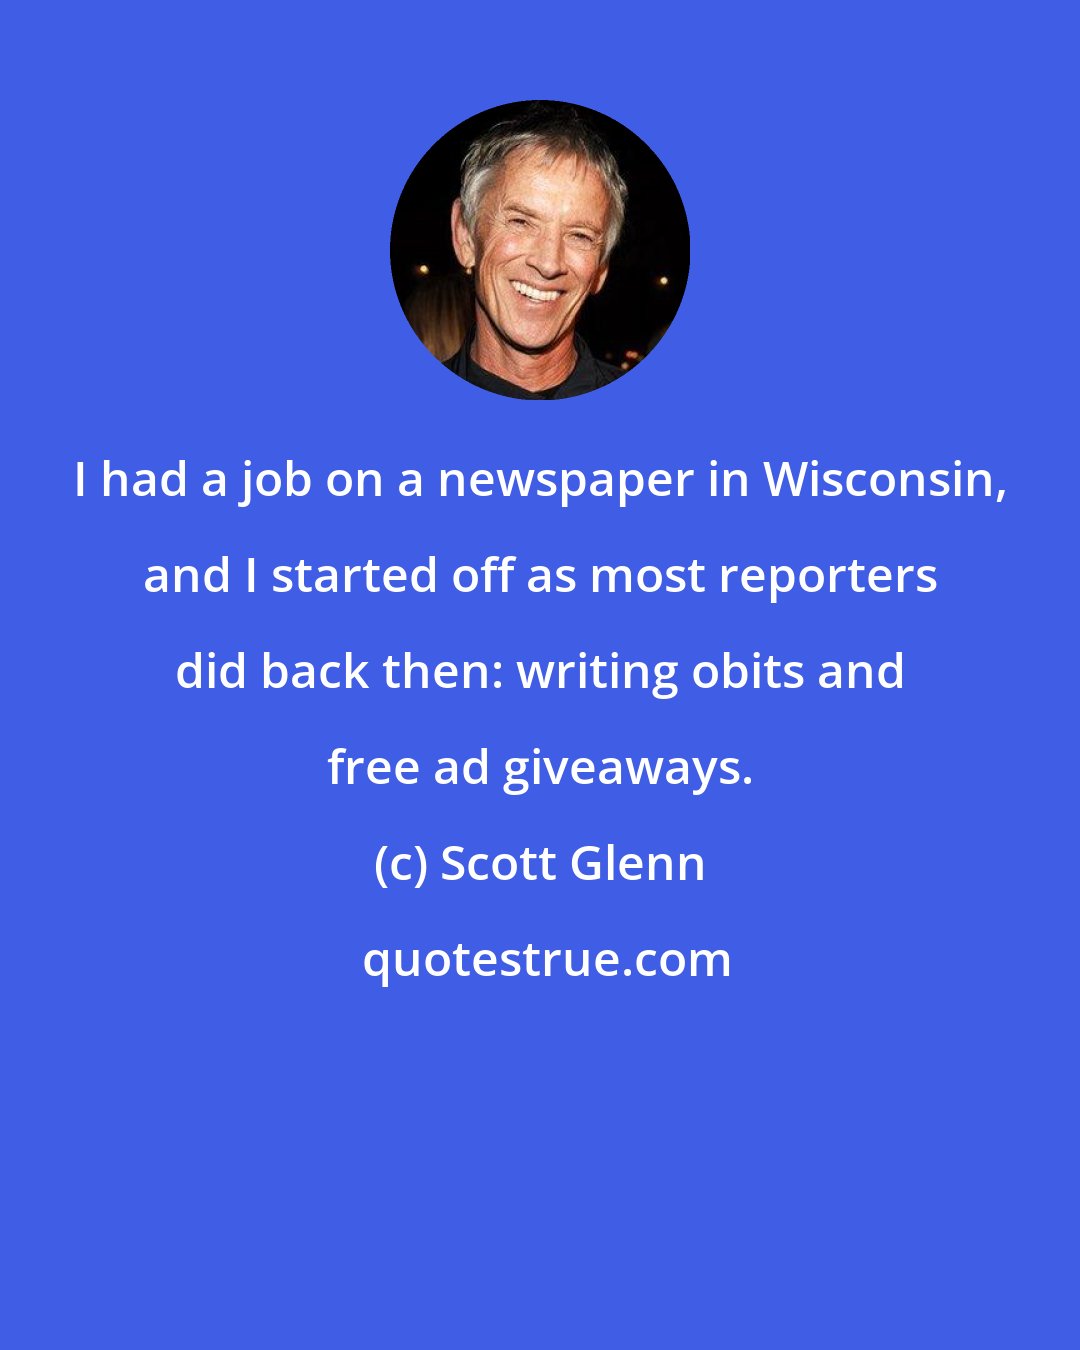 Scott Glenn: I had a job on a newspaper in Wisconsin, and I started off as most reporters did back then: writing obits and free ad giveaways.